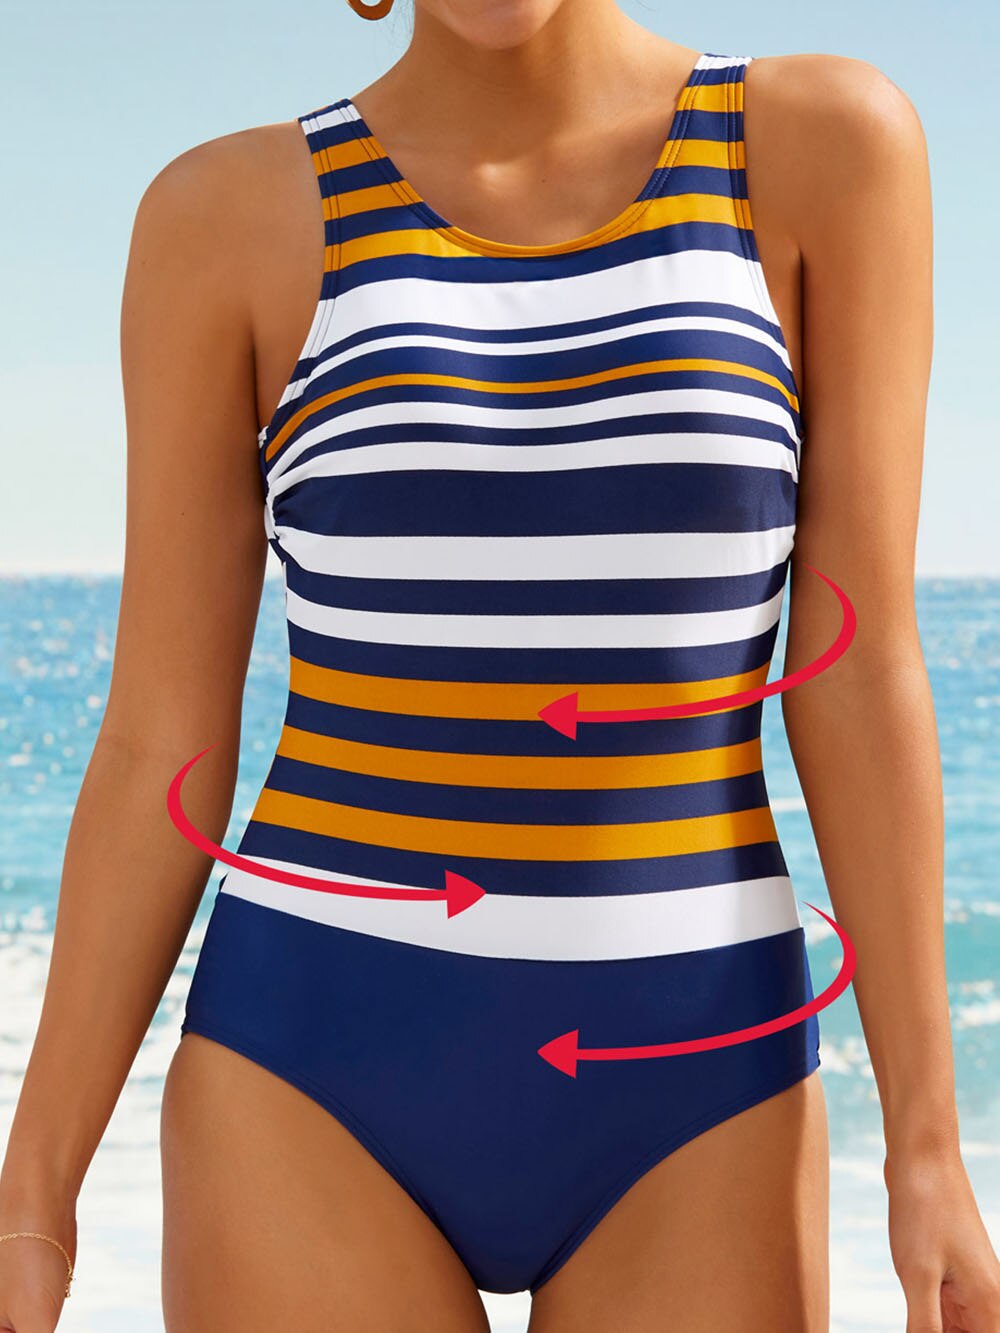 How Tummy Control Swimwear Can Give You Confidence at the Beach or Pool Striped Swimsuit